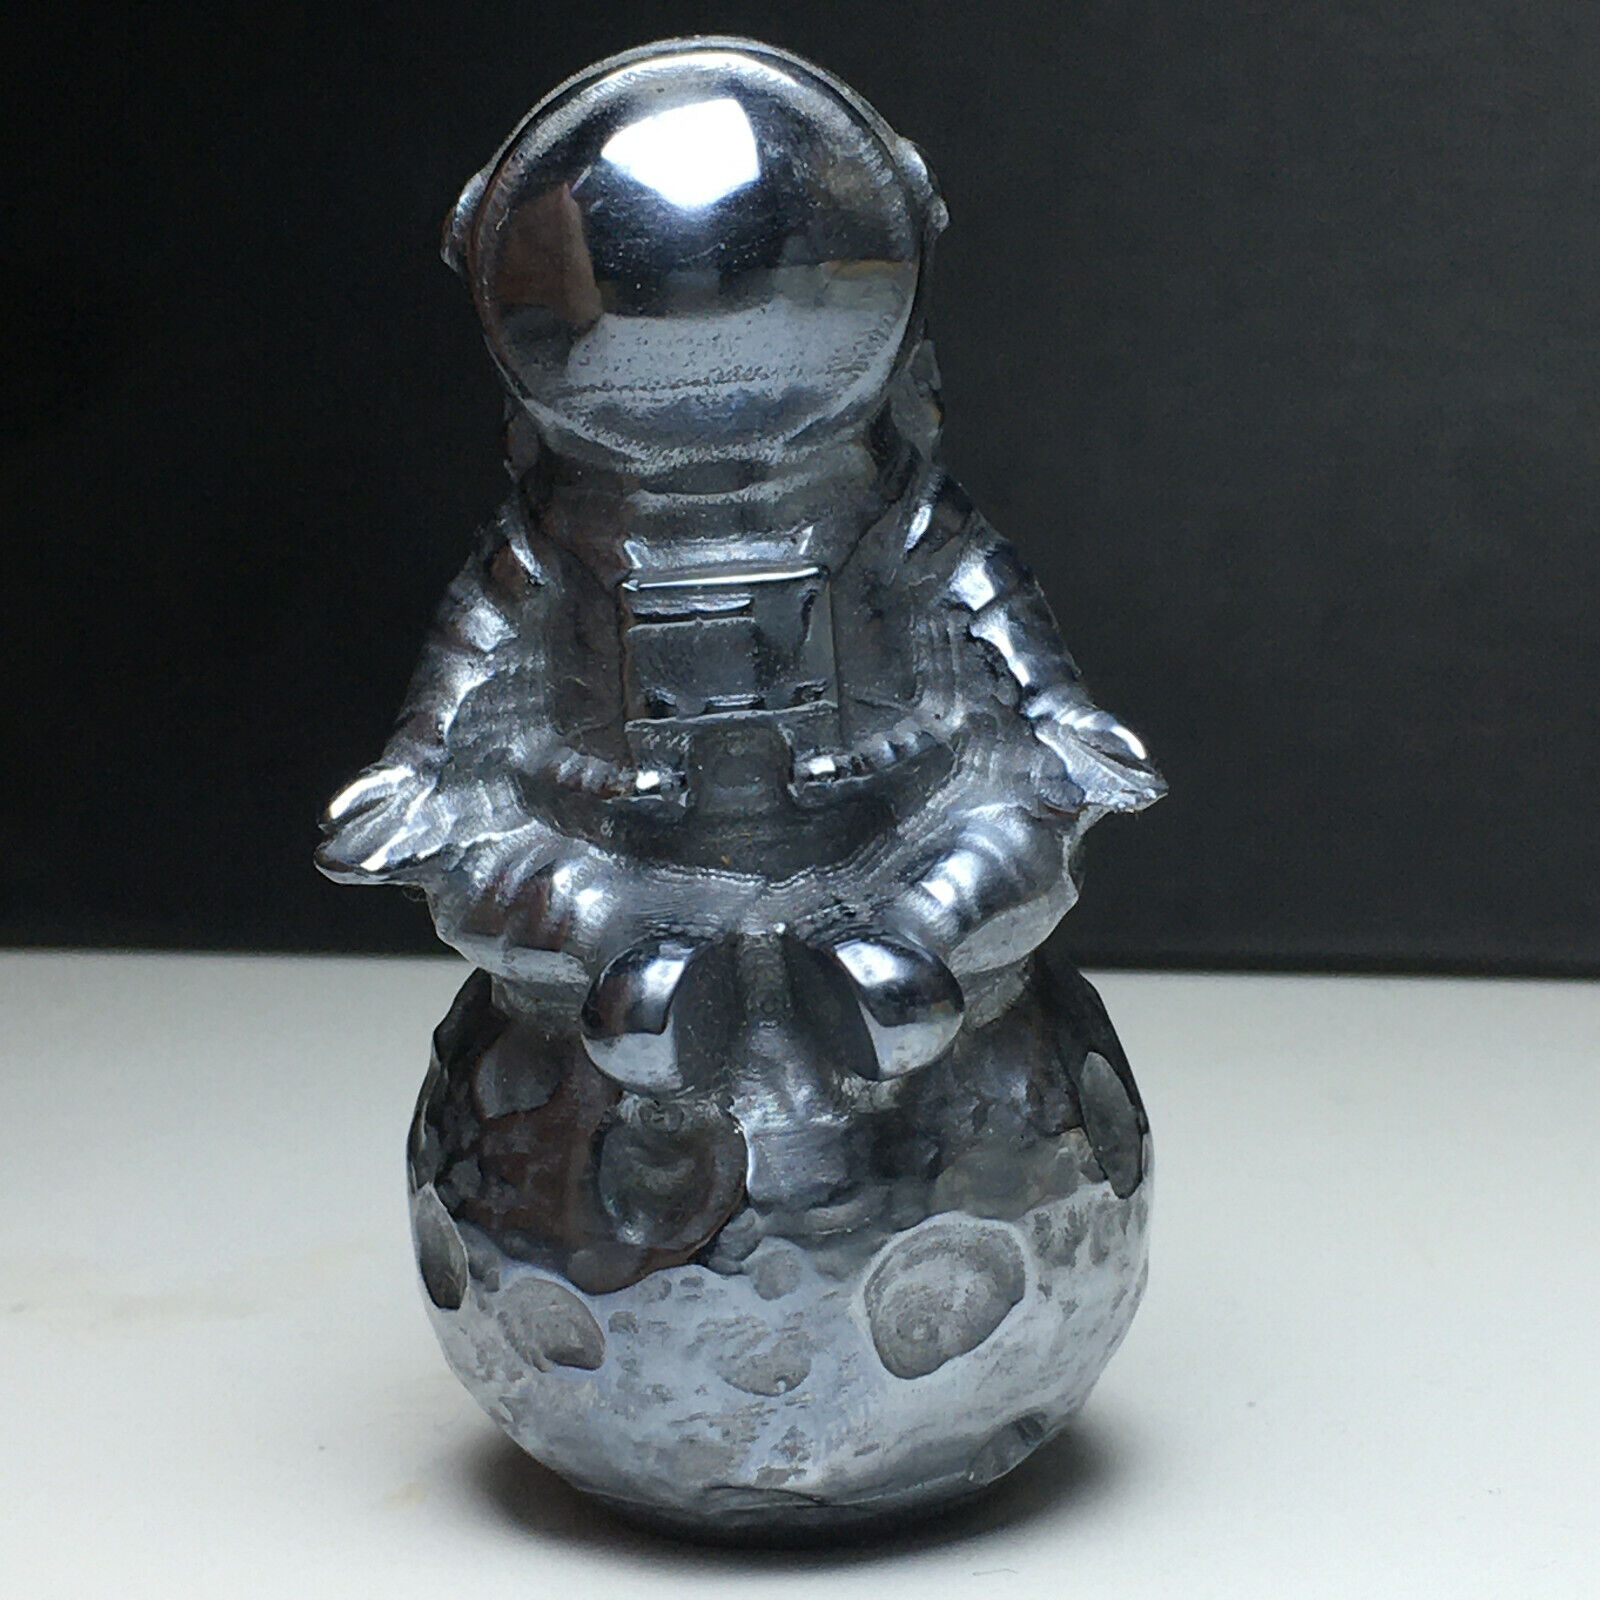 119g Natural Crystal Specimen. TERA-HERTZ. Hand-carved.The Exquisite Spaceman